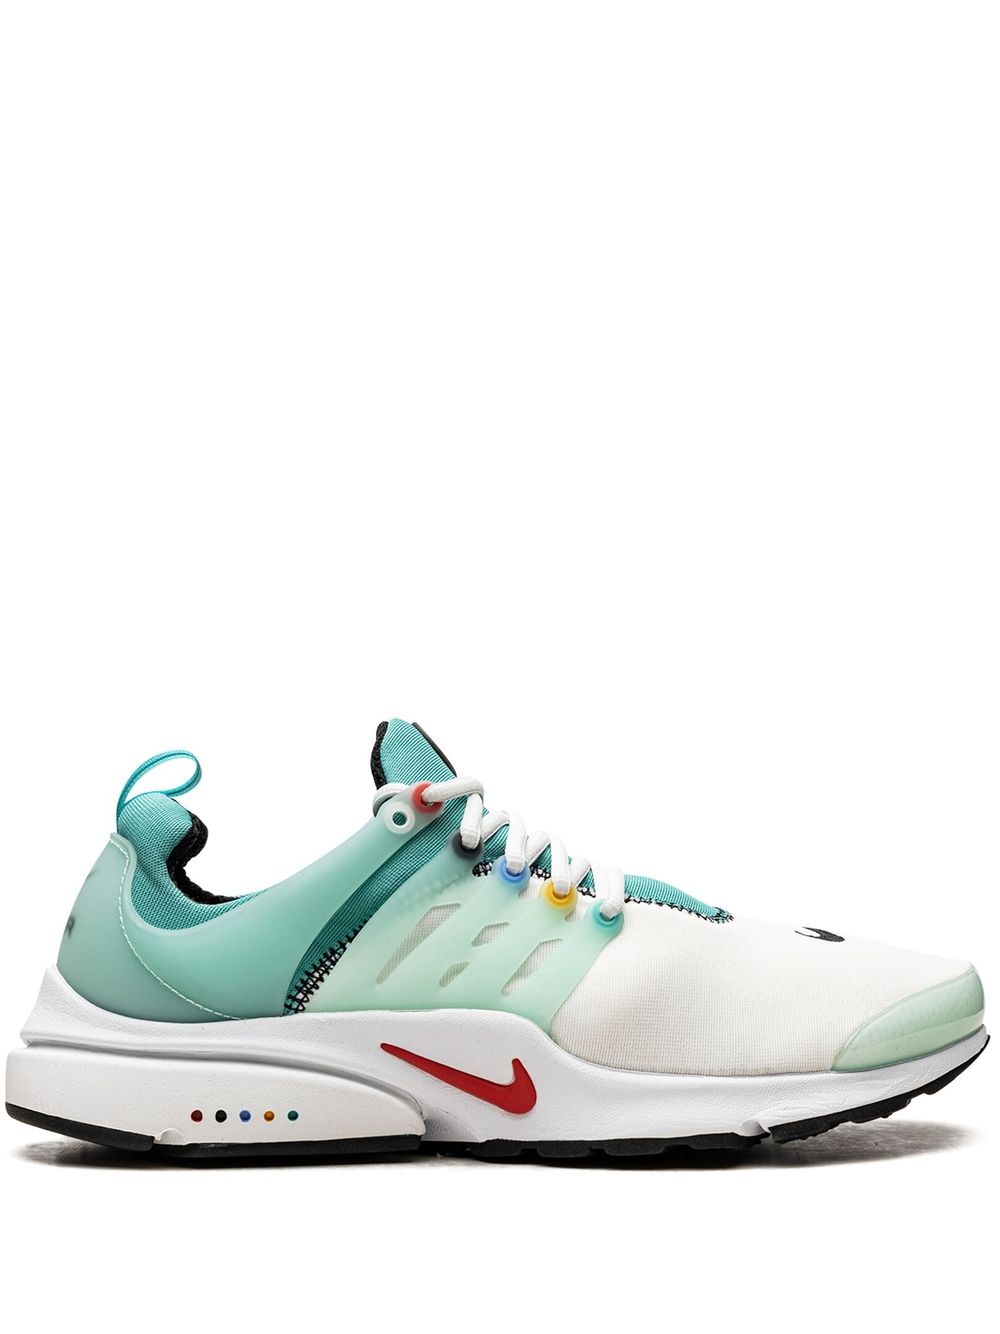 Nike Air Presto Low-top Sneakers In Washed Teal/university Red